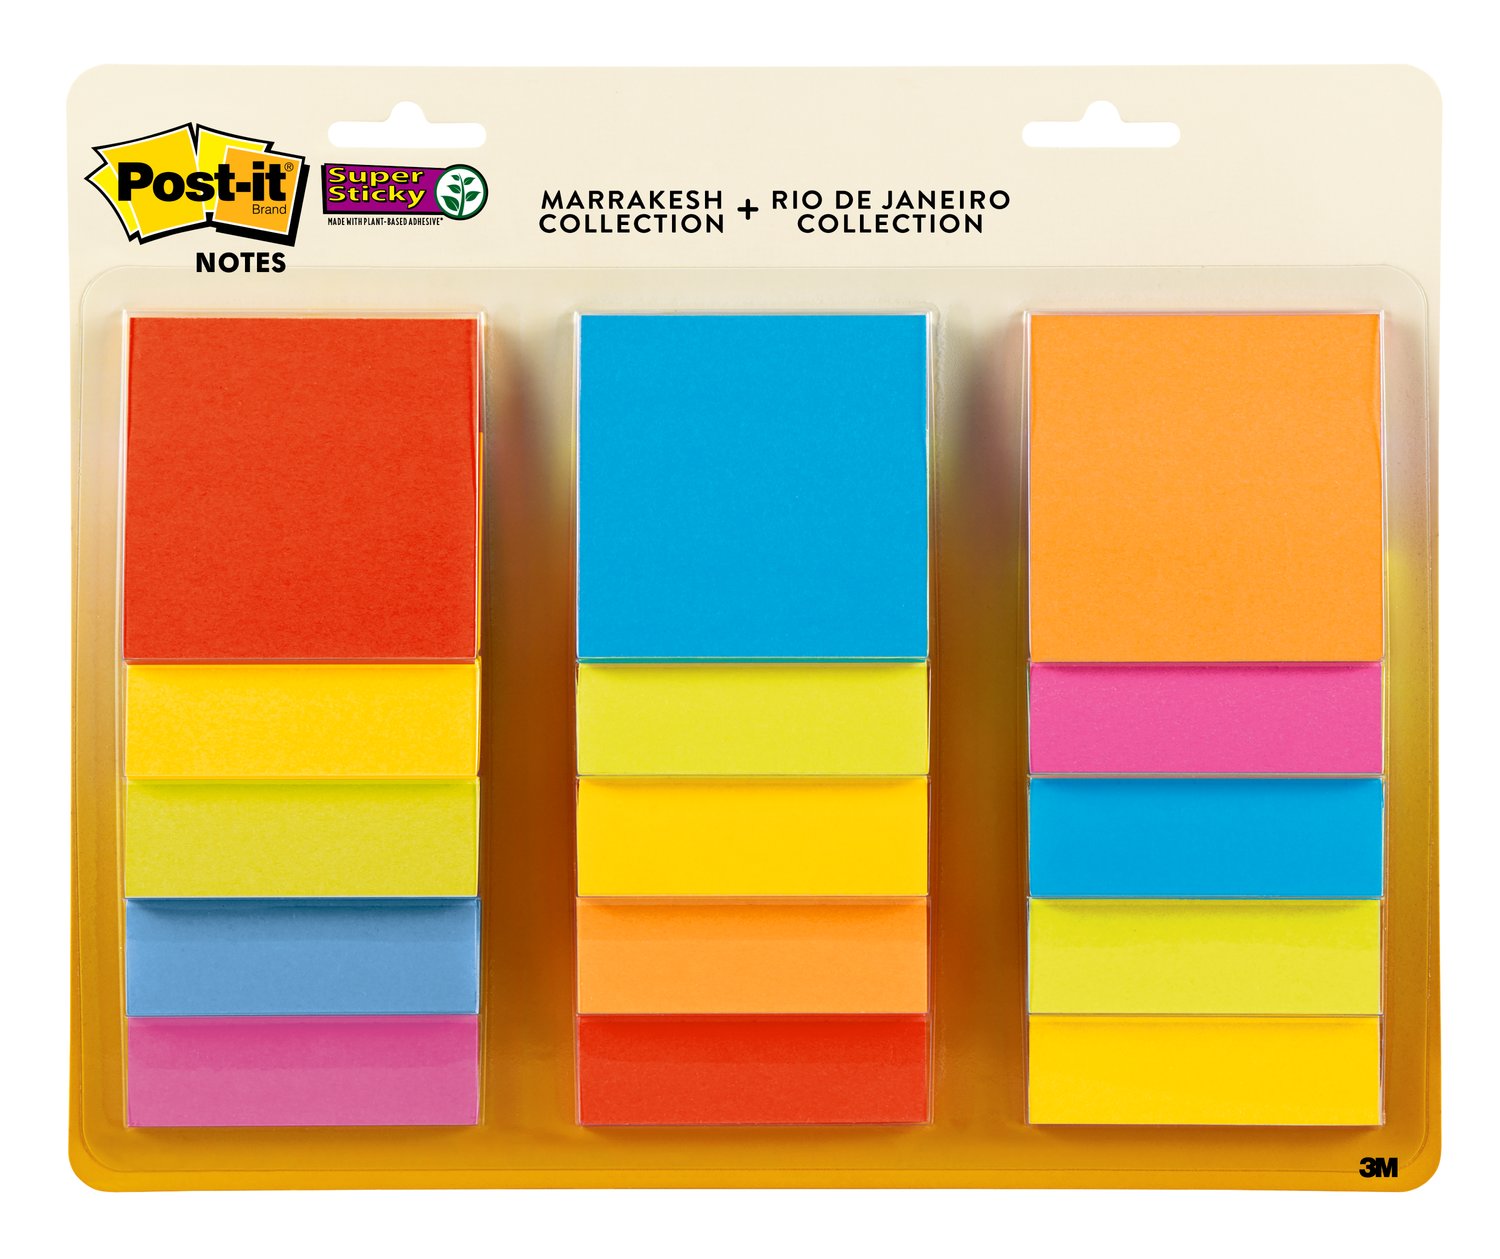 7100083502 - Post-it Super Sticky Notes 654-15SSMULTI, 3 In X 3 In (76 mm X 76 mm)
Assorted Colors